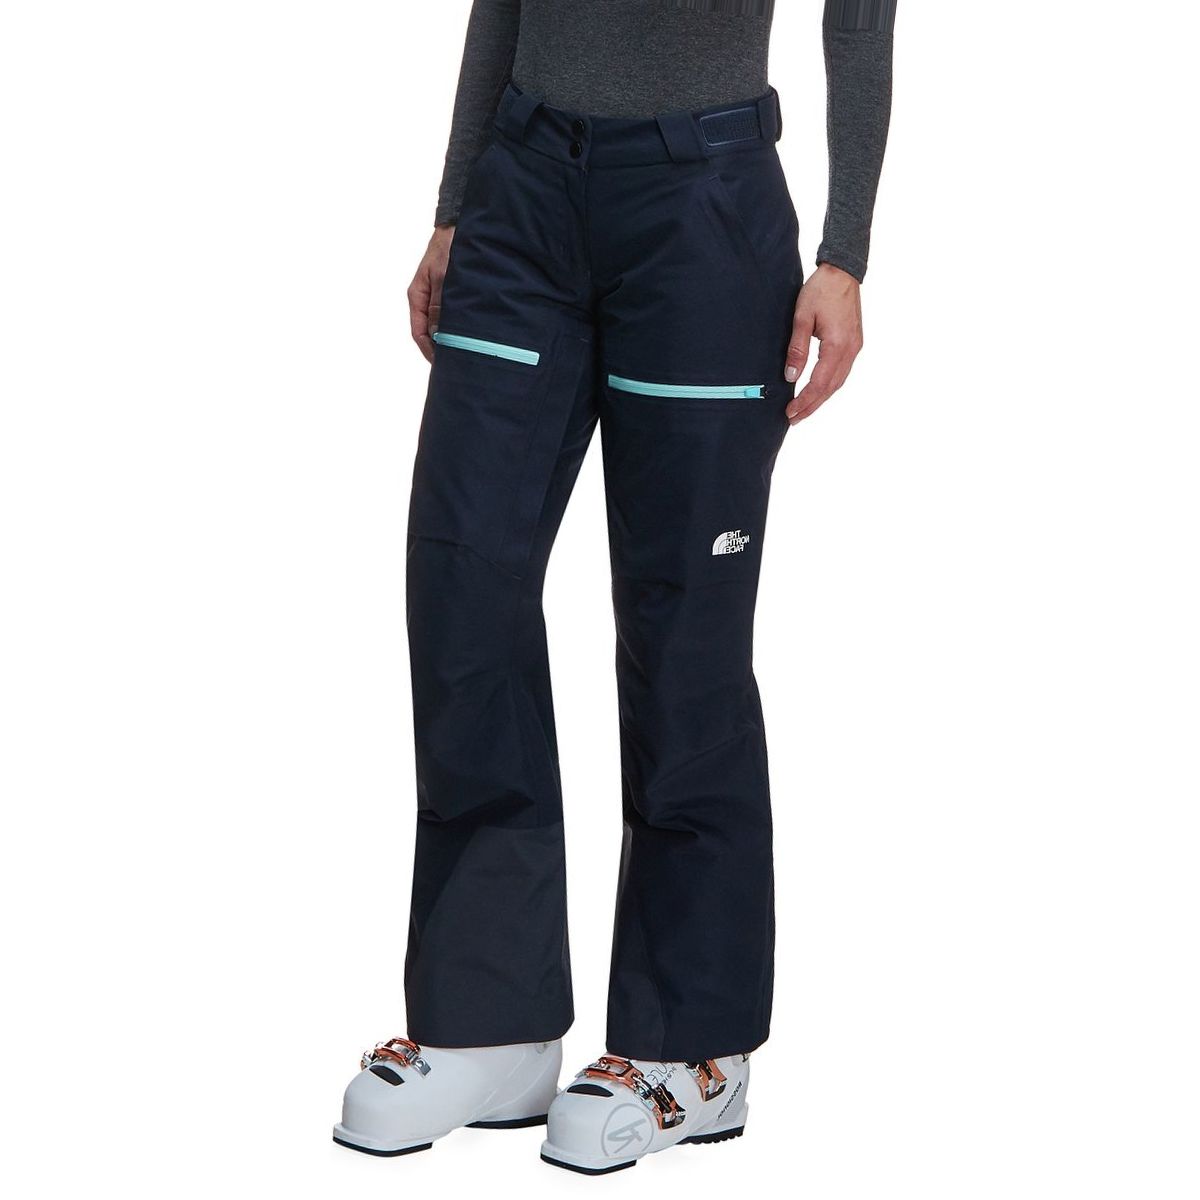 The North Face Powder Guide Pant - Women's